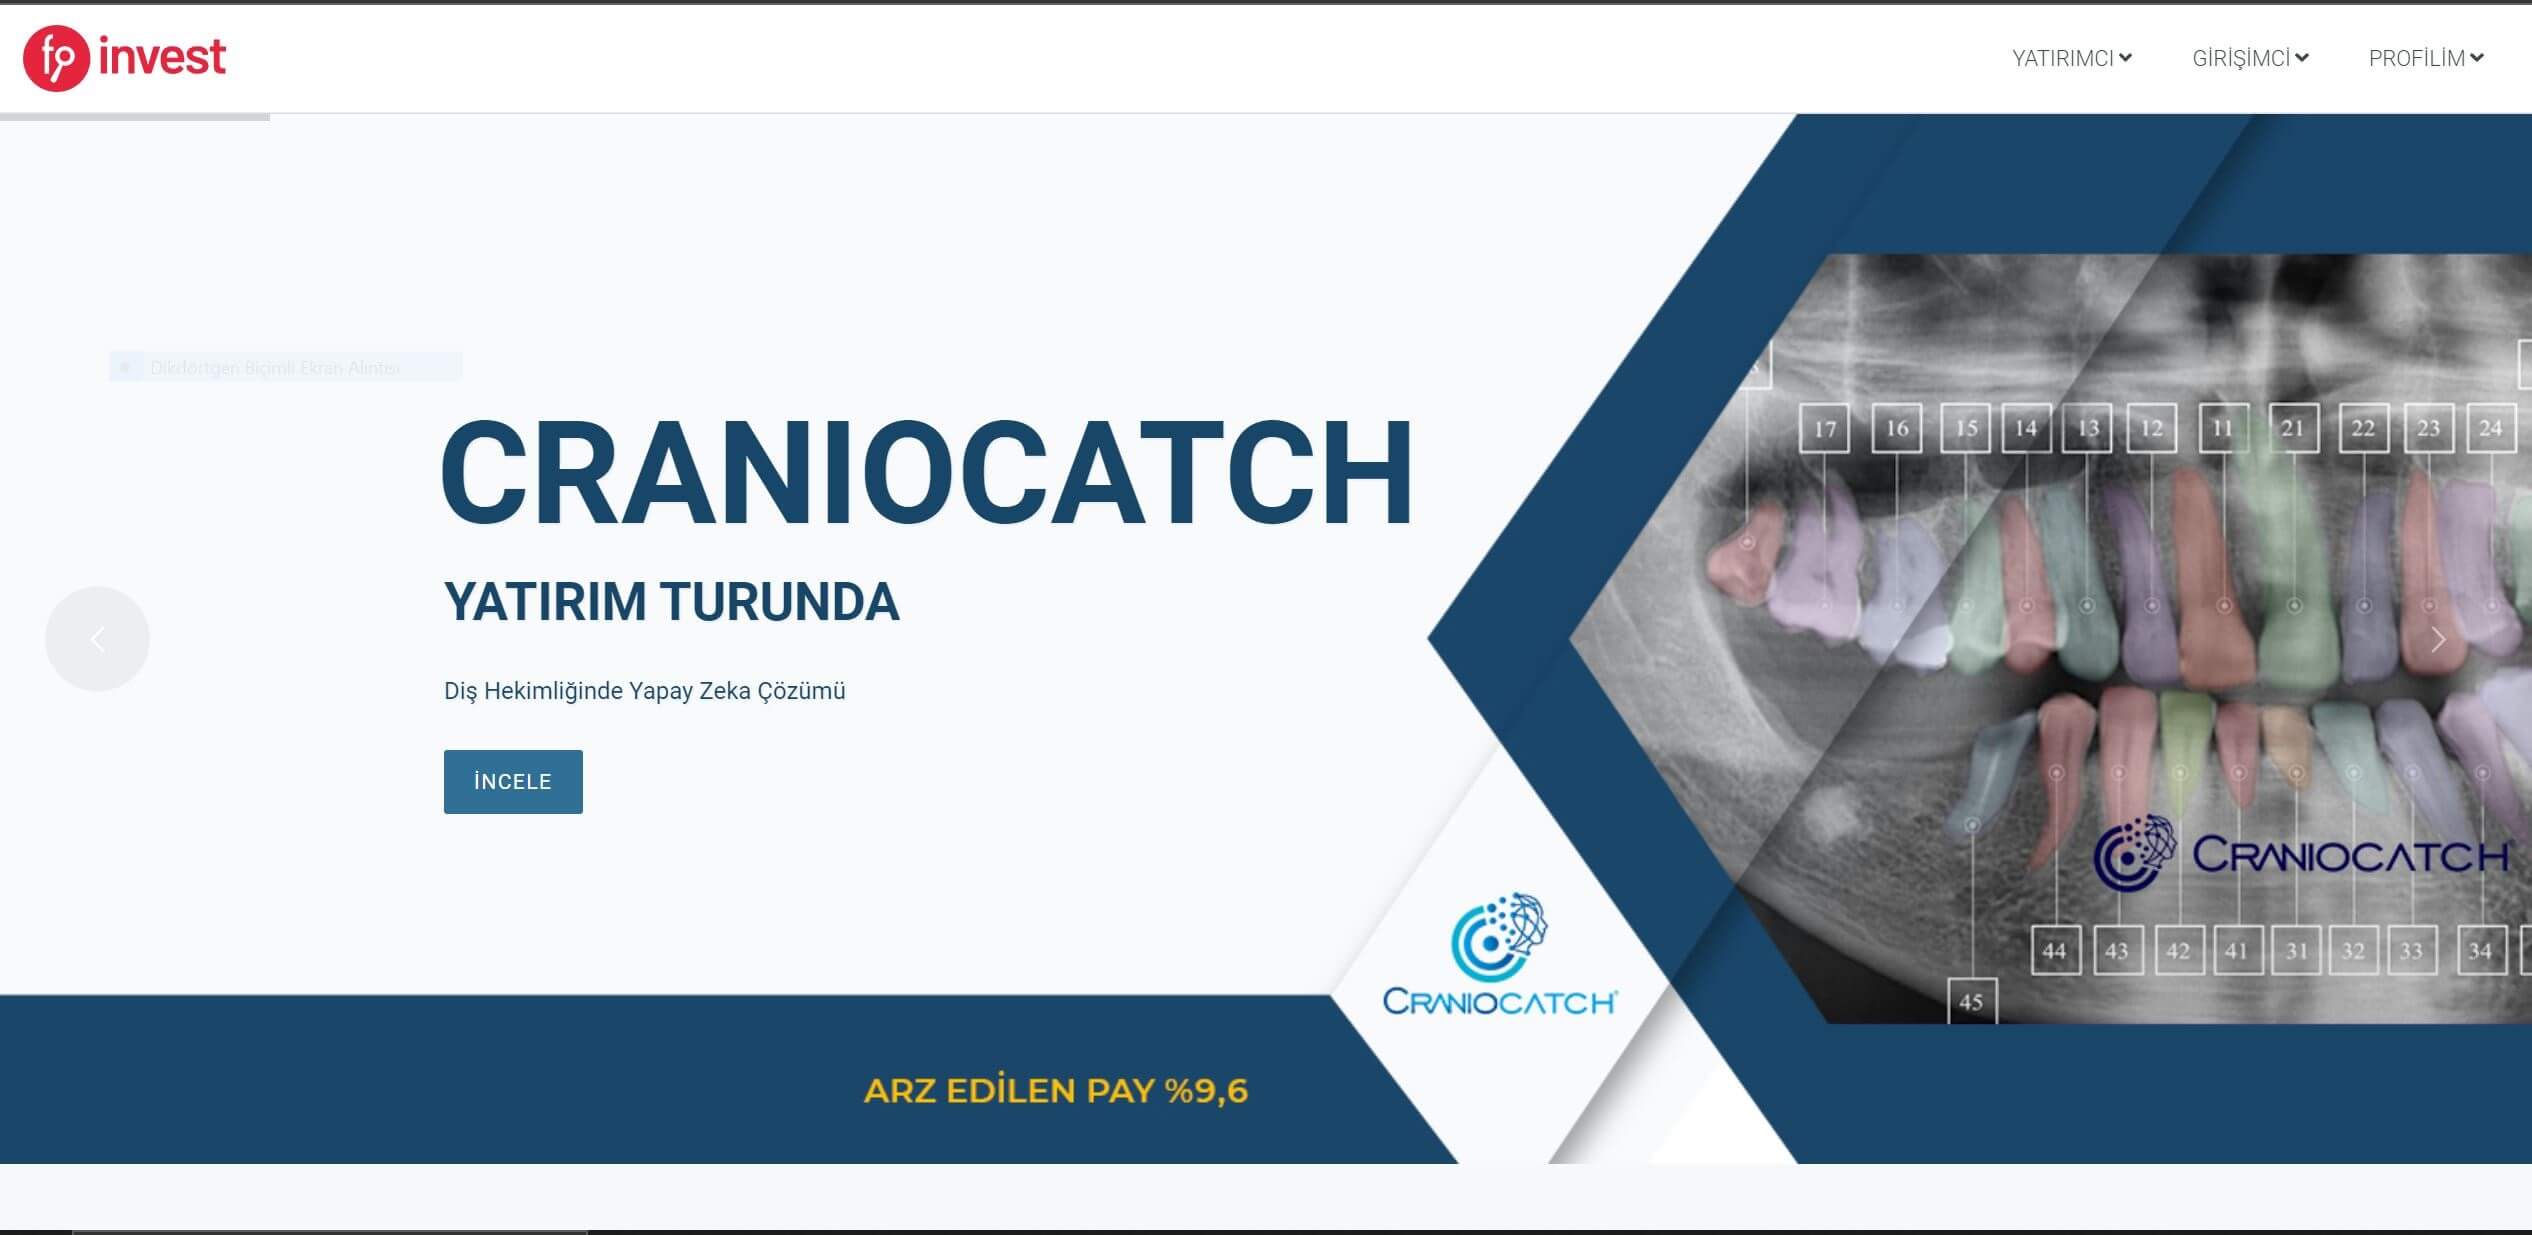 CranioCatch goes on an investment tour with the fund finder...